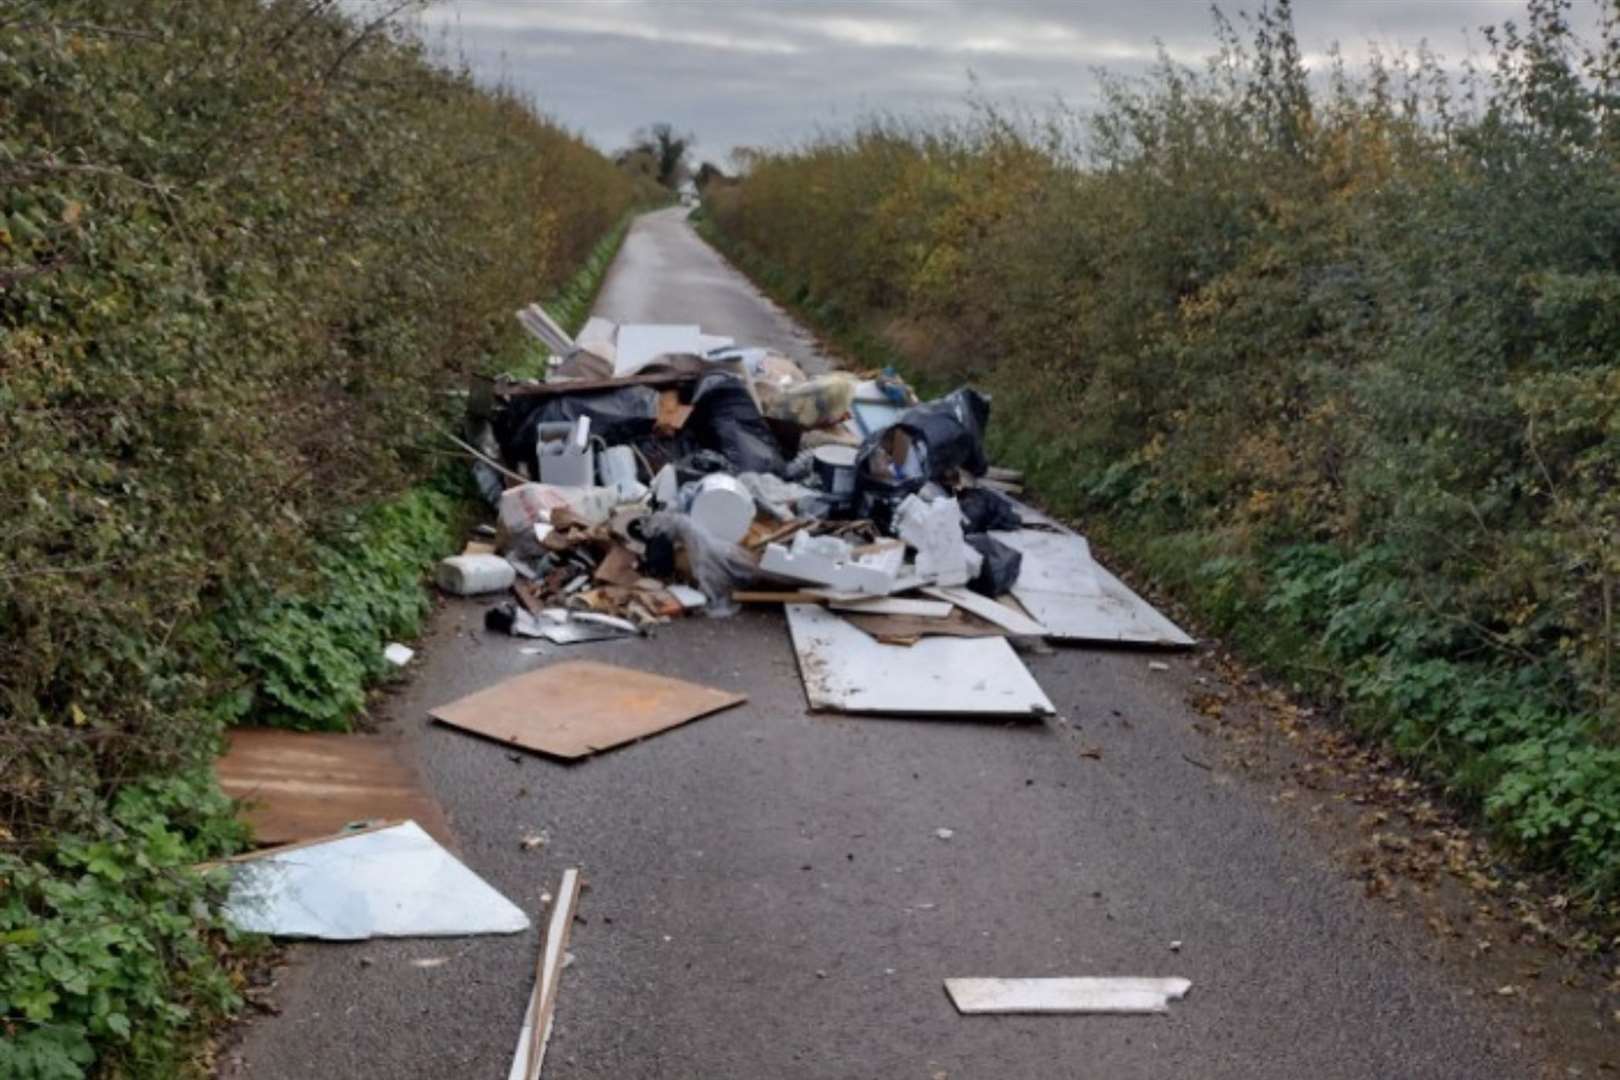 A pile of fly-tipped rubbish has been dumped in the middle of a road in Birchington. Photo: Thanet District Council